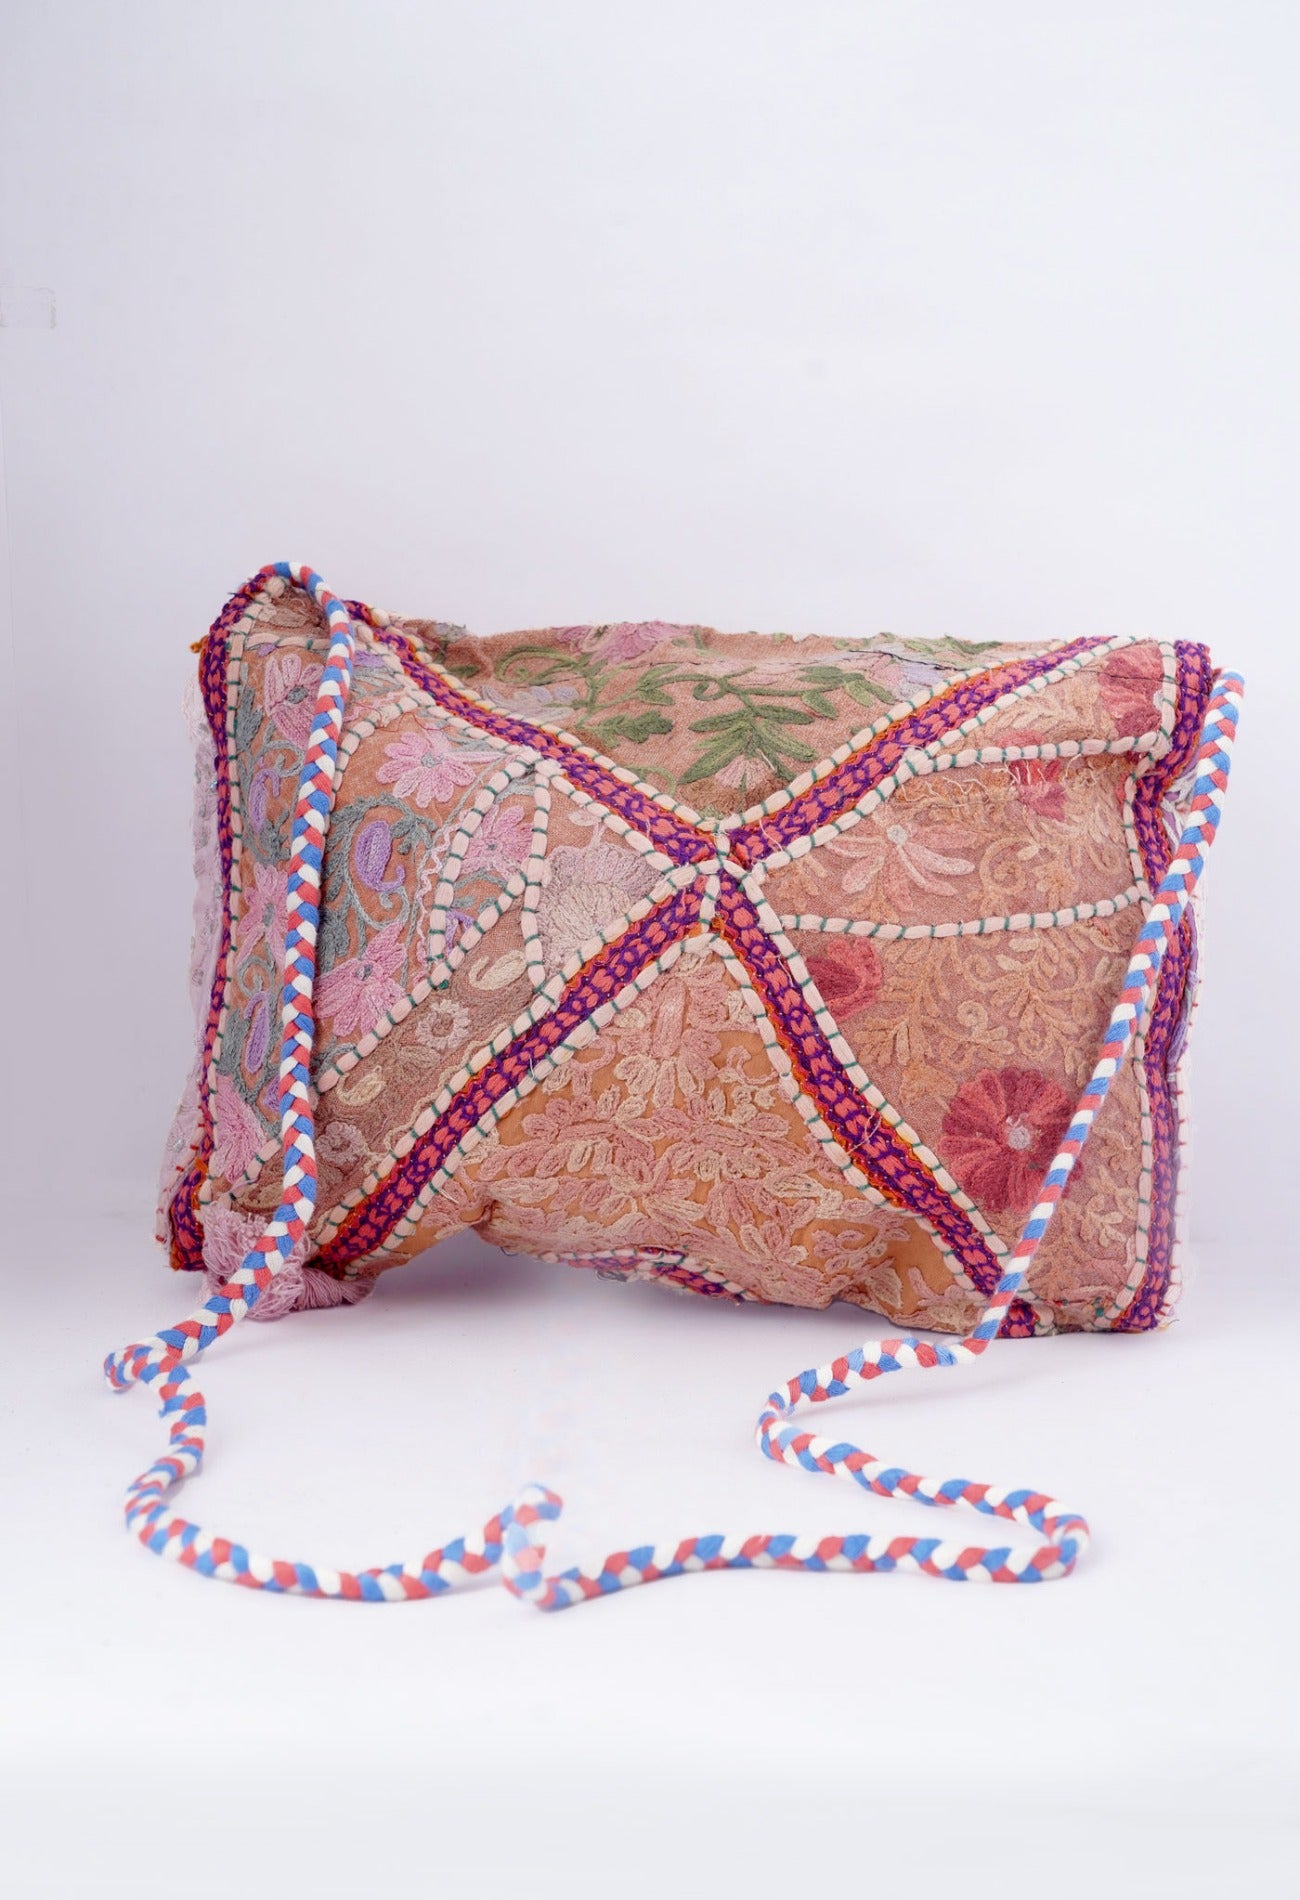 Online Shopping for Pink Indian Handicraft Embroidered Hand Bag with Weaving from Rajasthan at Unnatisilks.com India_x000D_
Online Shopping for Pink Indian Handicraft Embroidered Hand Bag with Weaving from Rajasthan at Unnatisilks.com India_x000D_
Online Shopping for Pink Indian Handicraft Embroidered Hand Bag with Weaving from Rajasthan at Unnatisilks.com India_x000D_
